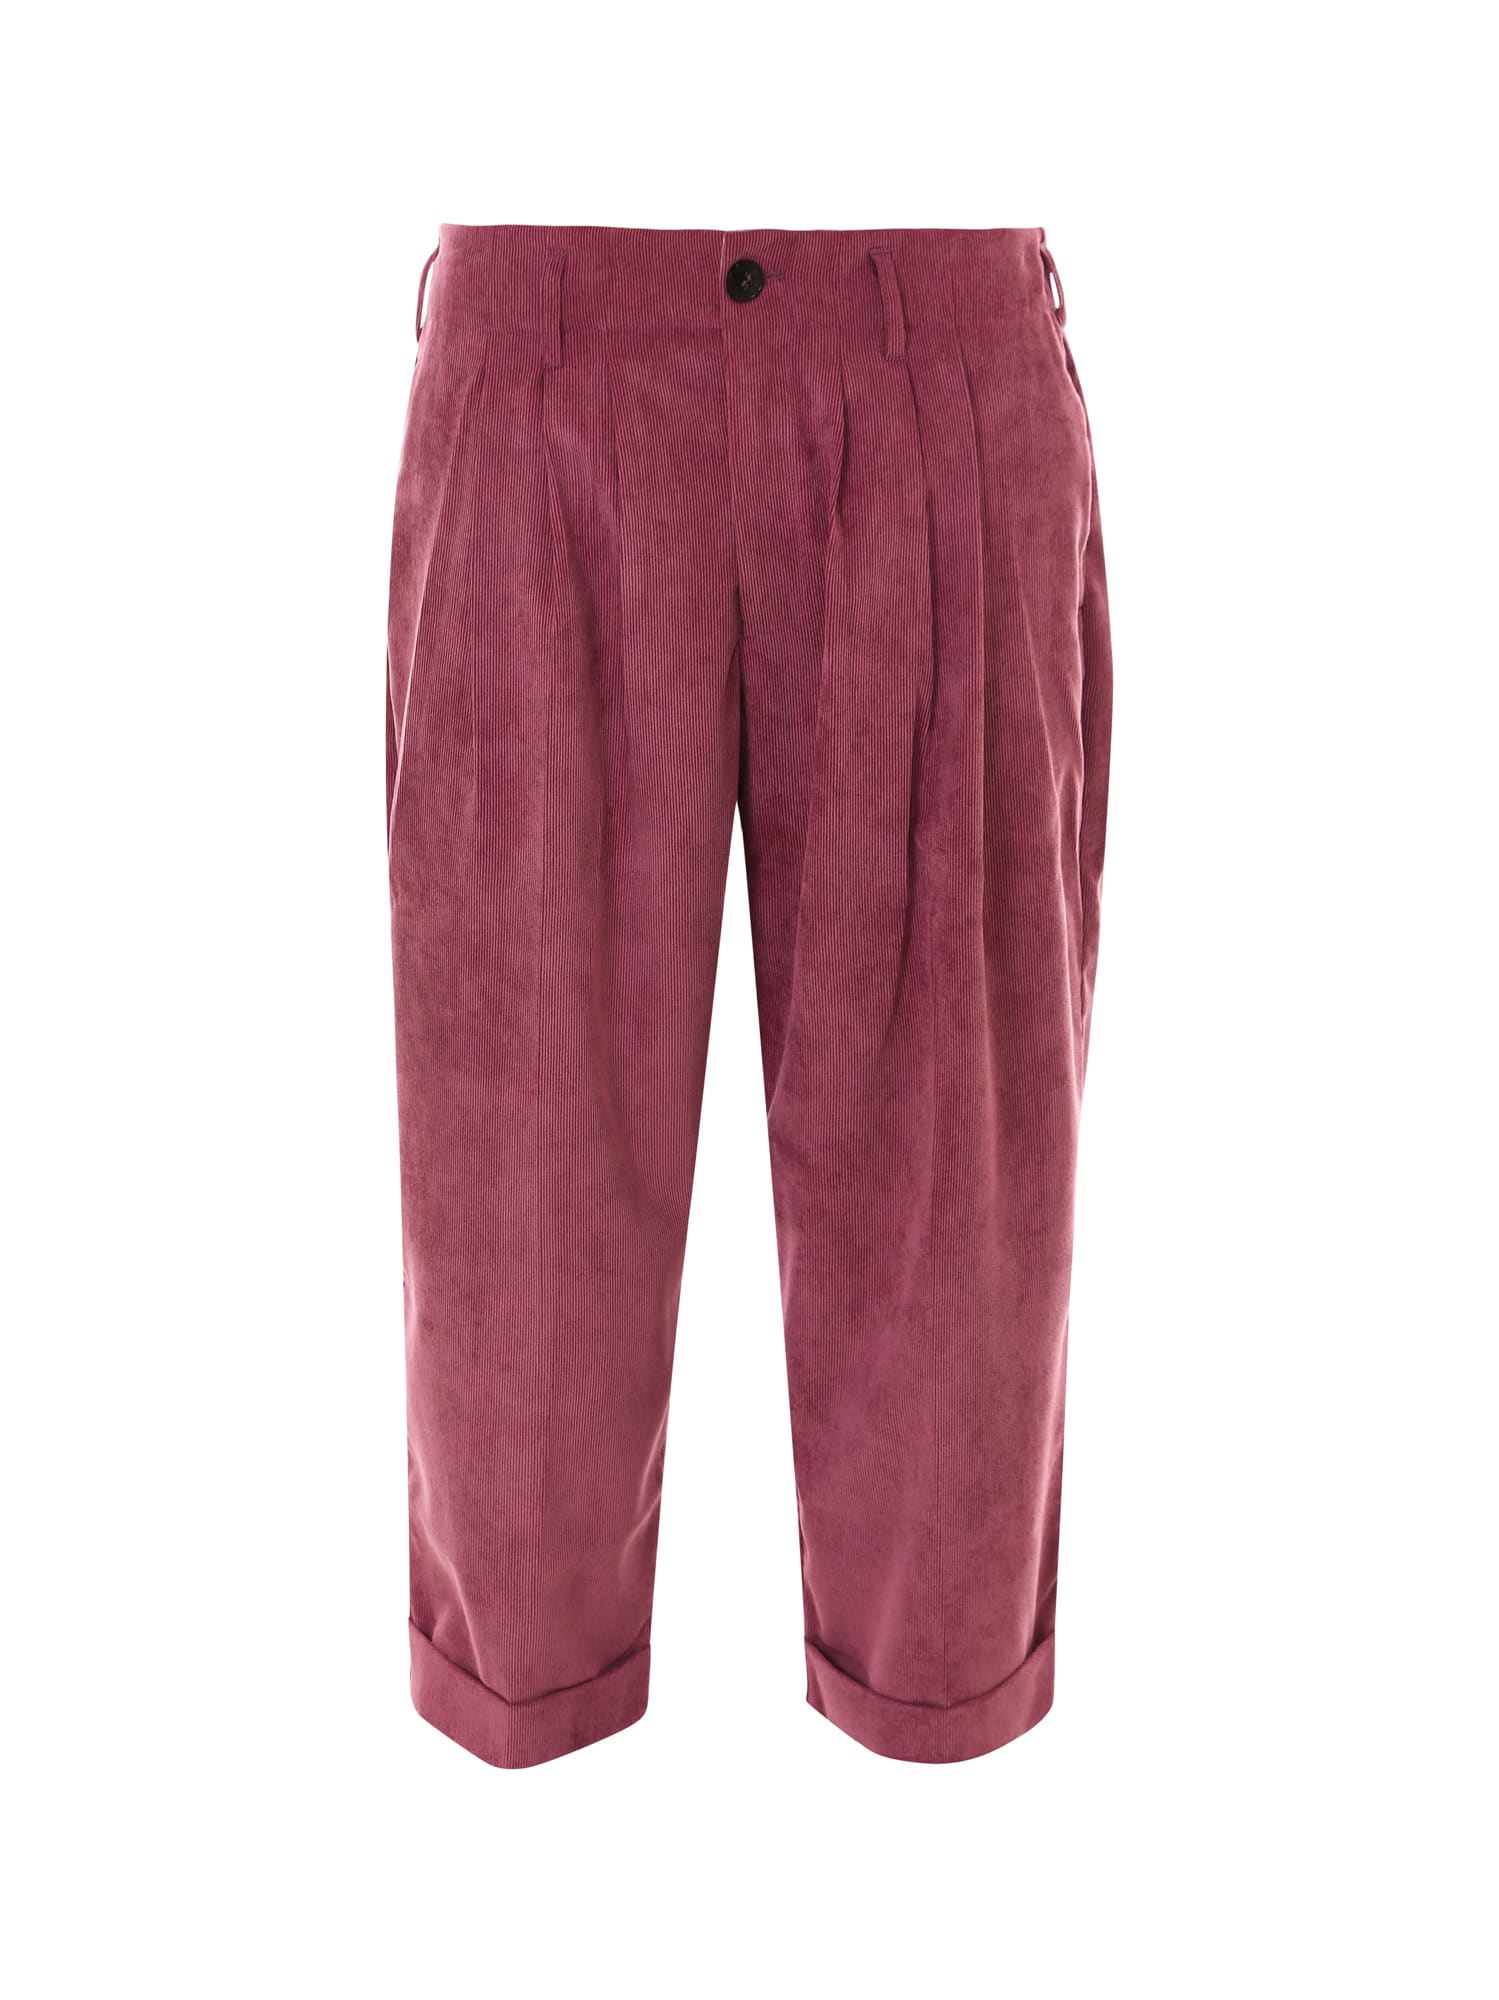 THE SILTED COMPANY TROUSER,OSCYLC LILAC